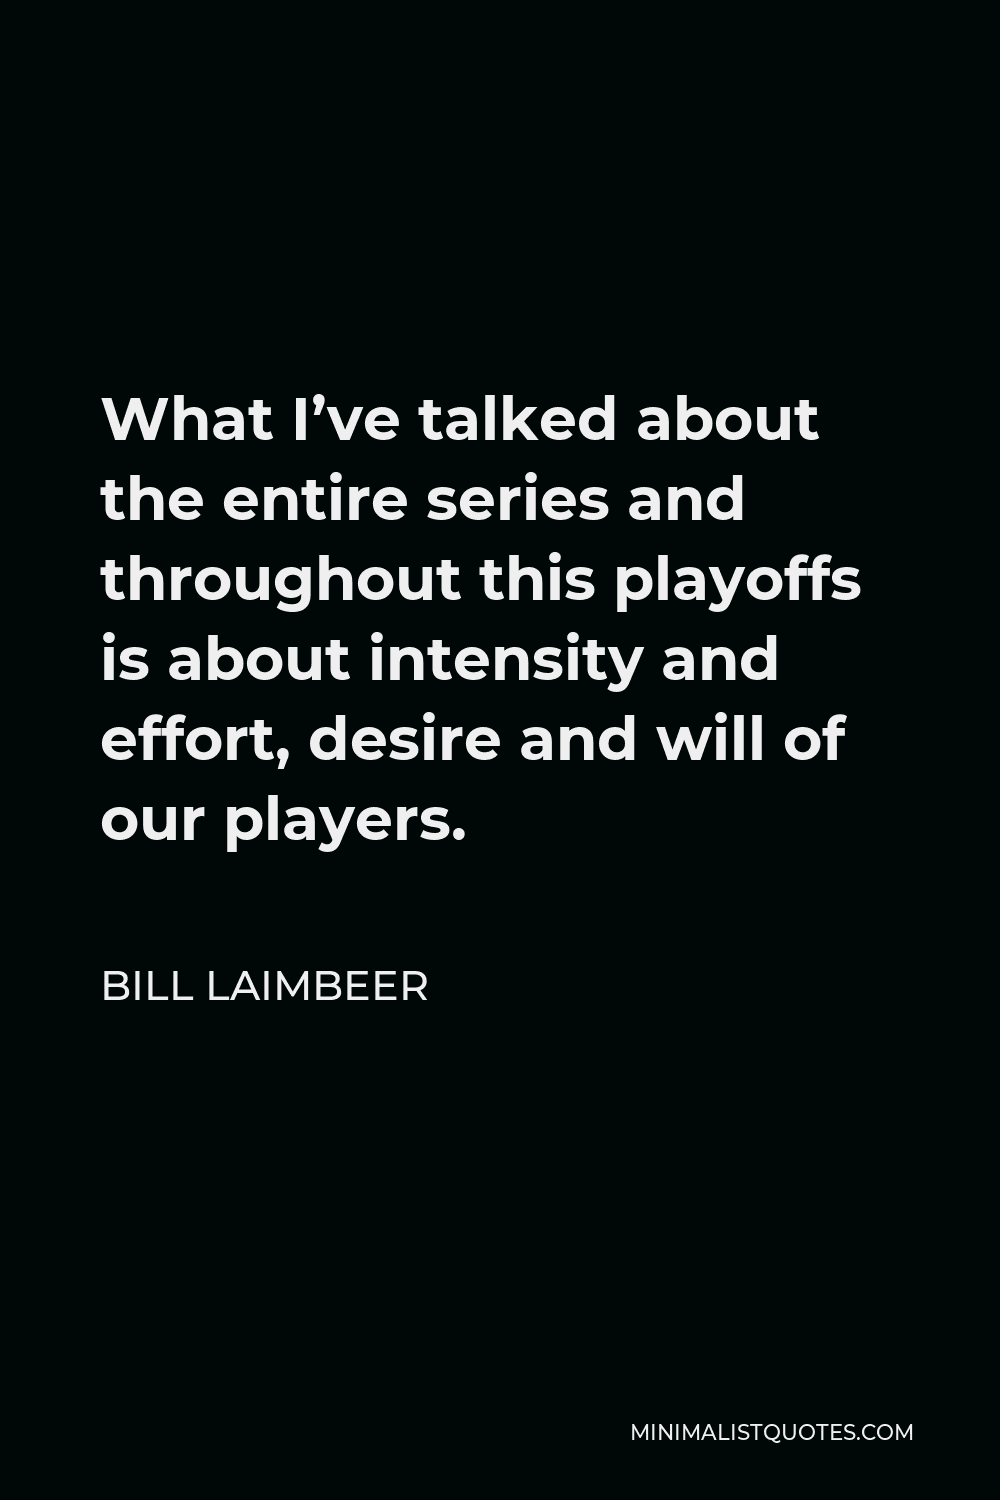 Bill Laimbeer Quote - What I’ve talked about the entire series and throughout this playoffs is about intensity and effort, desire and will of our players.